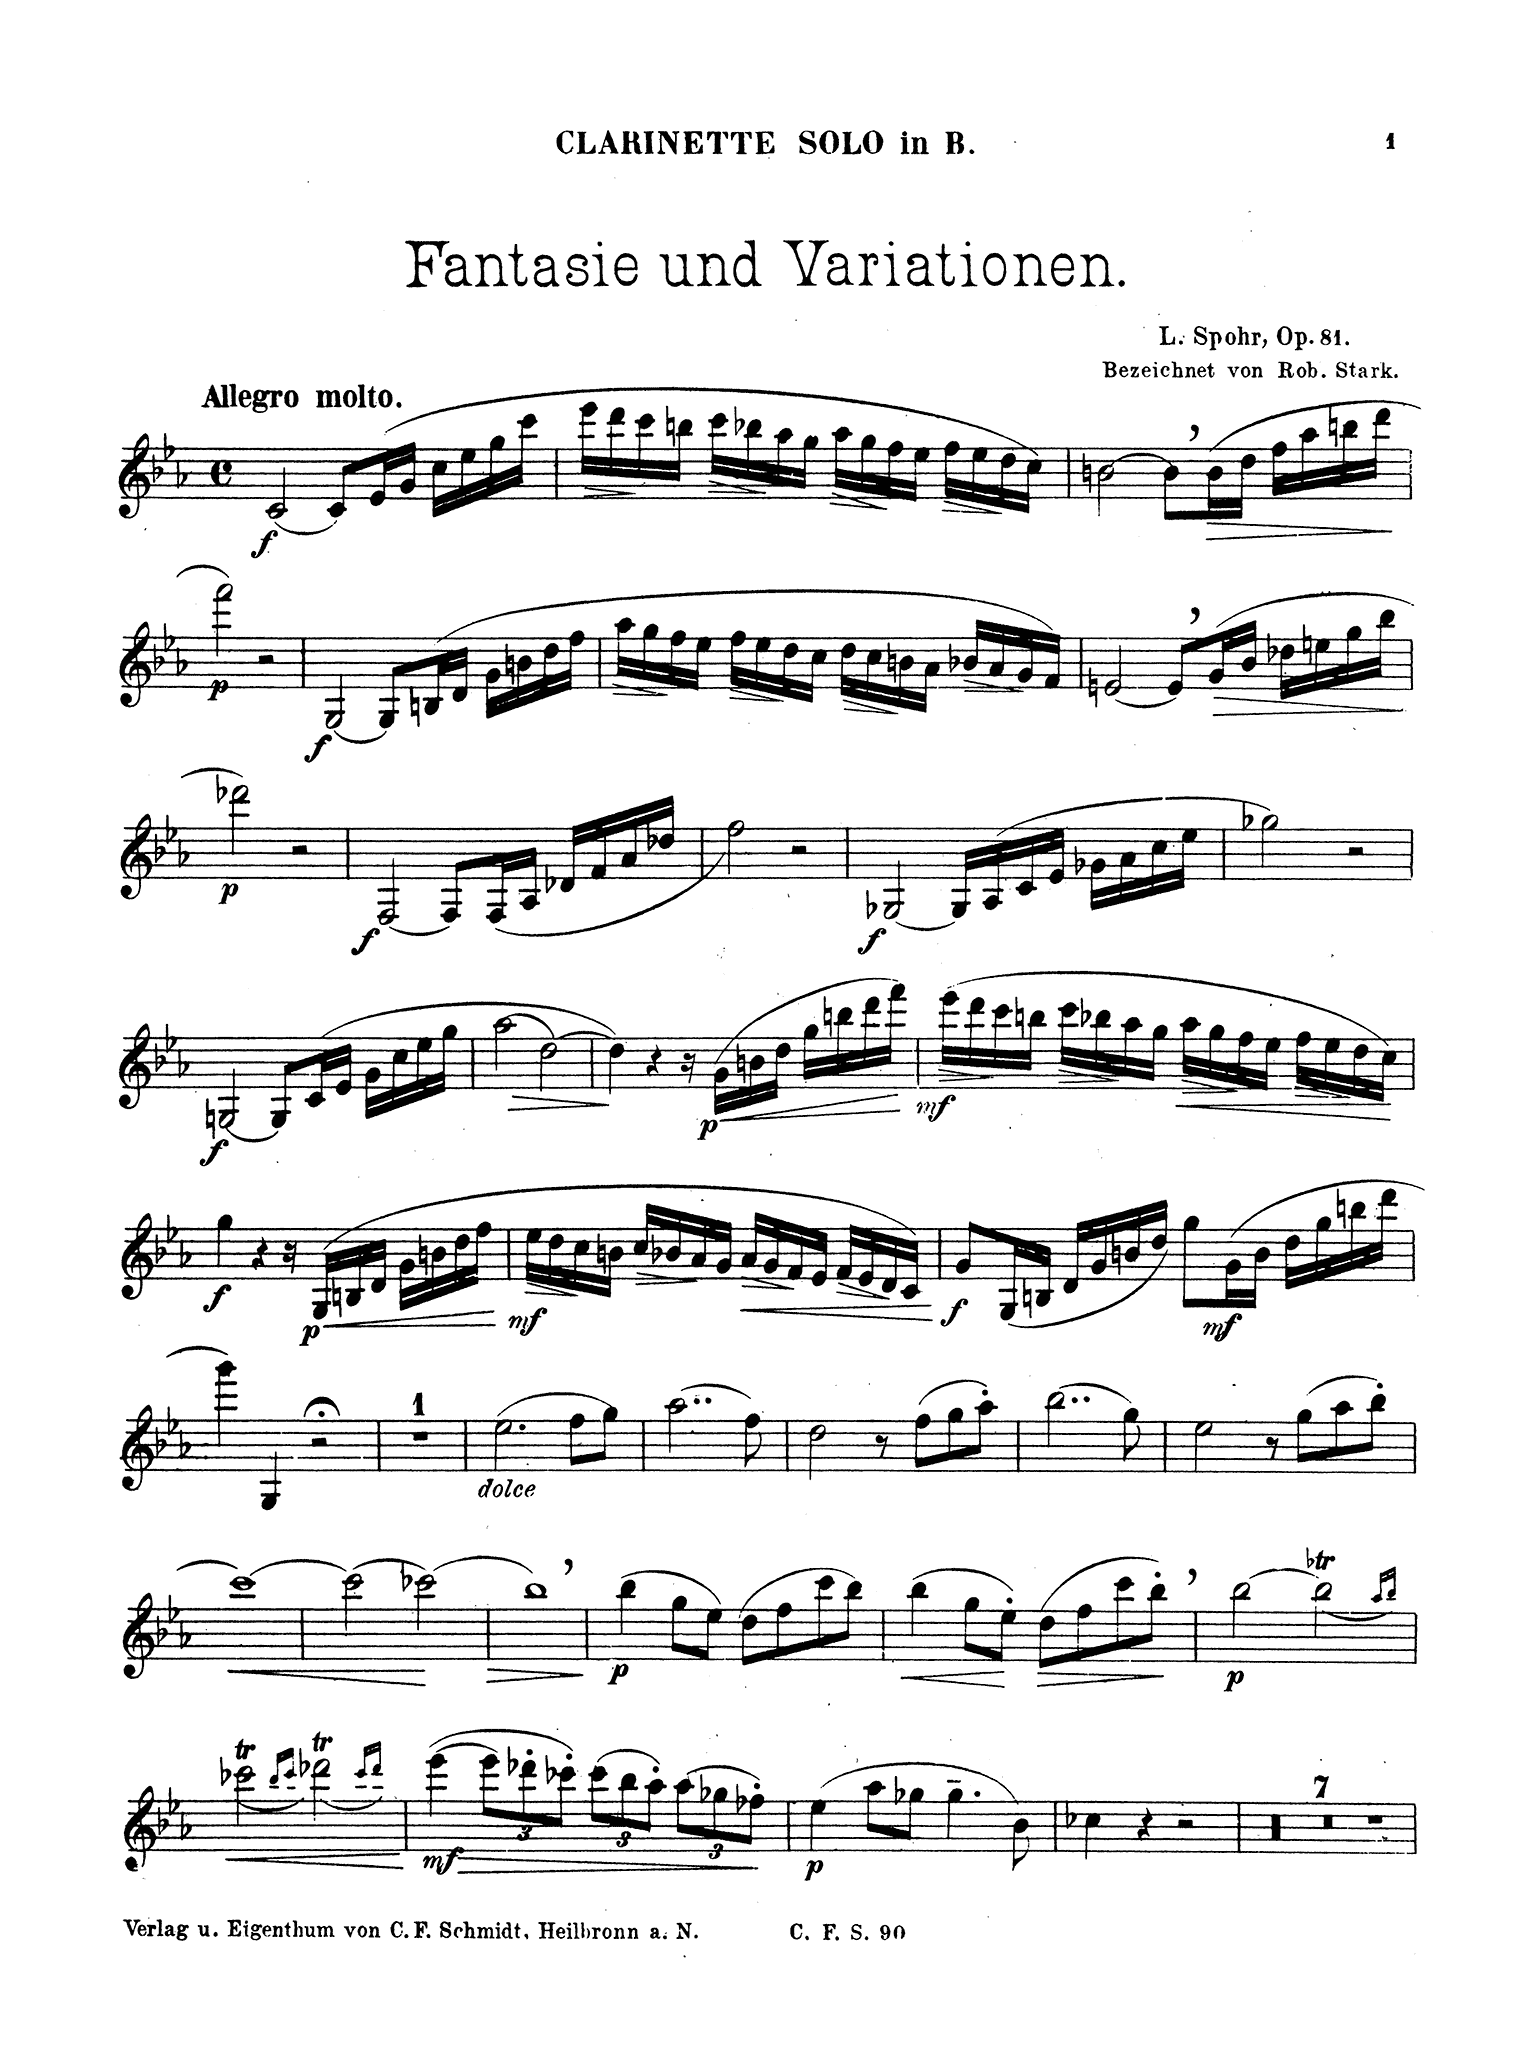 Spohr Fantasy & Variations on a Theme of Danzi, Op. 81 clarinet and piano solo part